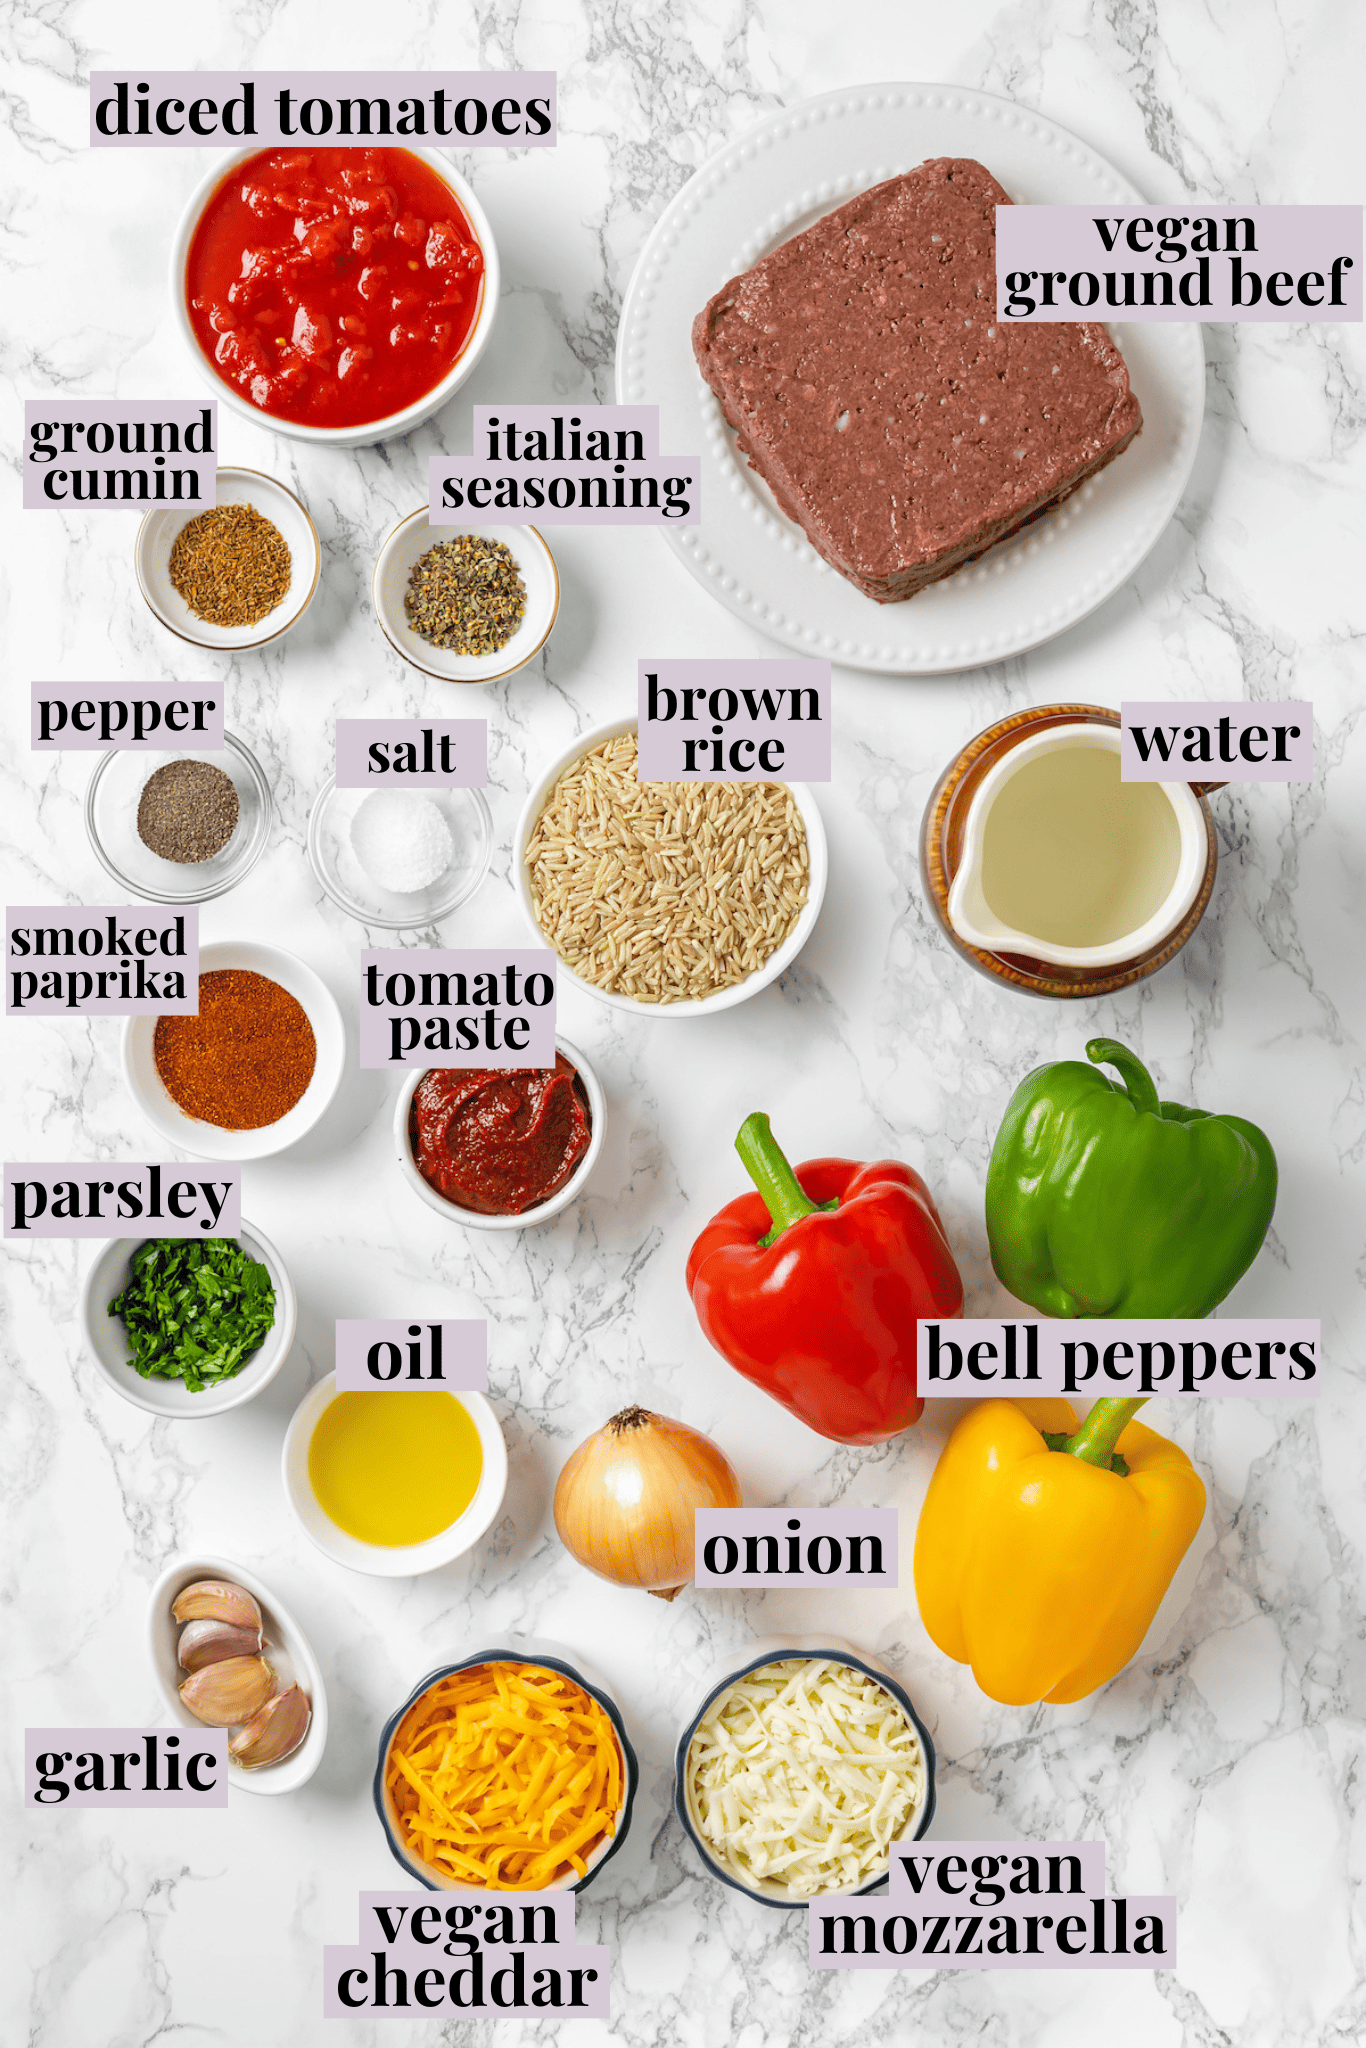 Overhead view of ingredients for vegan stuffed peppers with labels